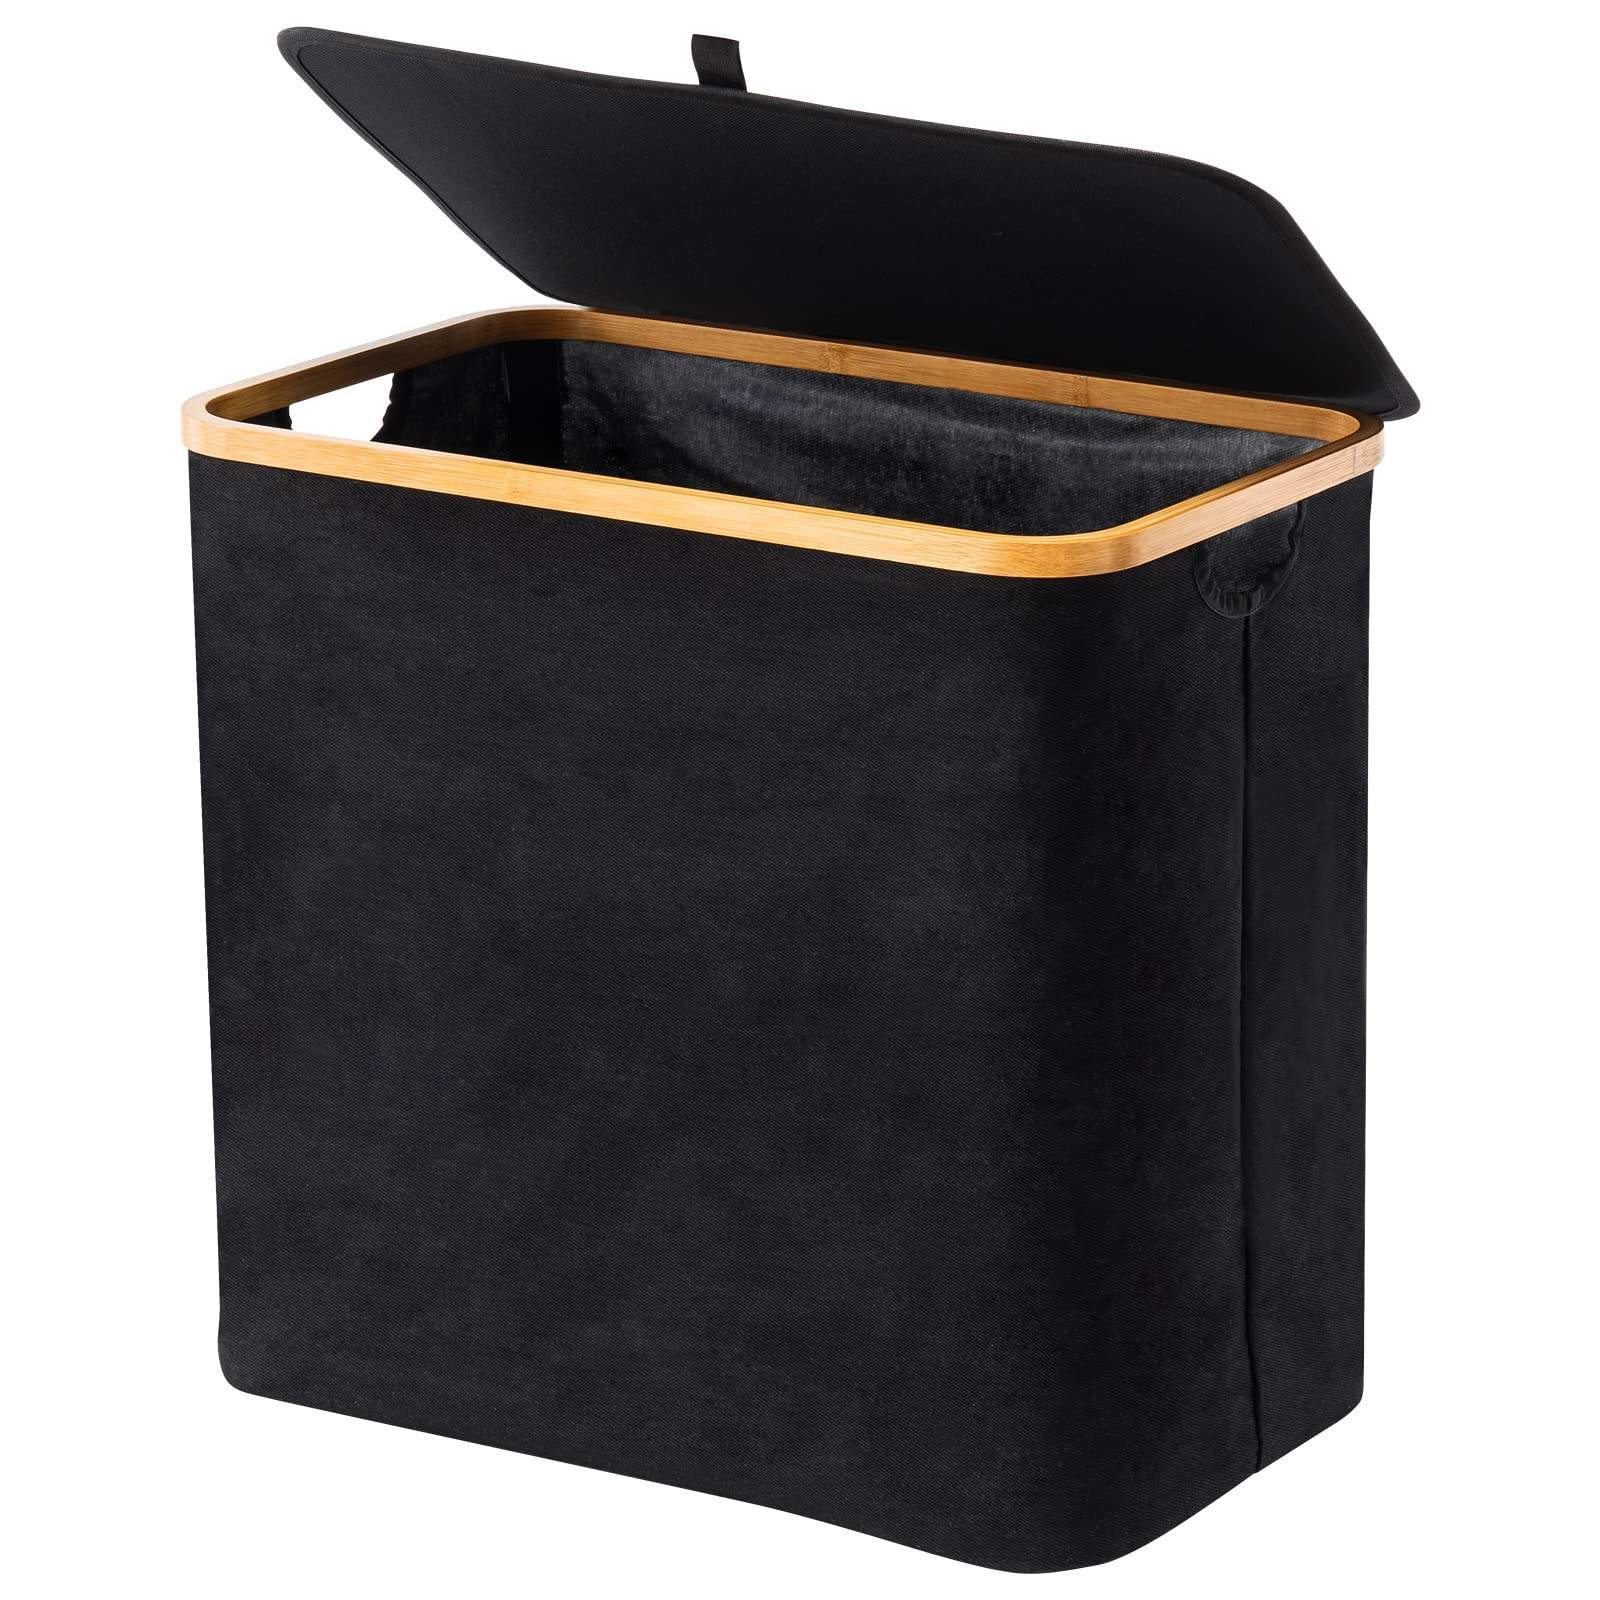 90L Collapsible Dirty Clothes Basket Large Laundry Hamper with Lid and Handle Foldable Storage Bin for Bedroom and Bathroom